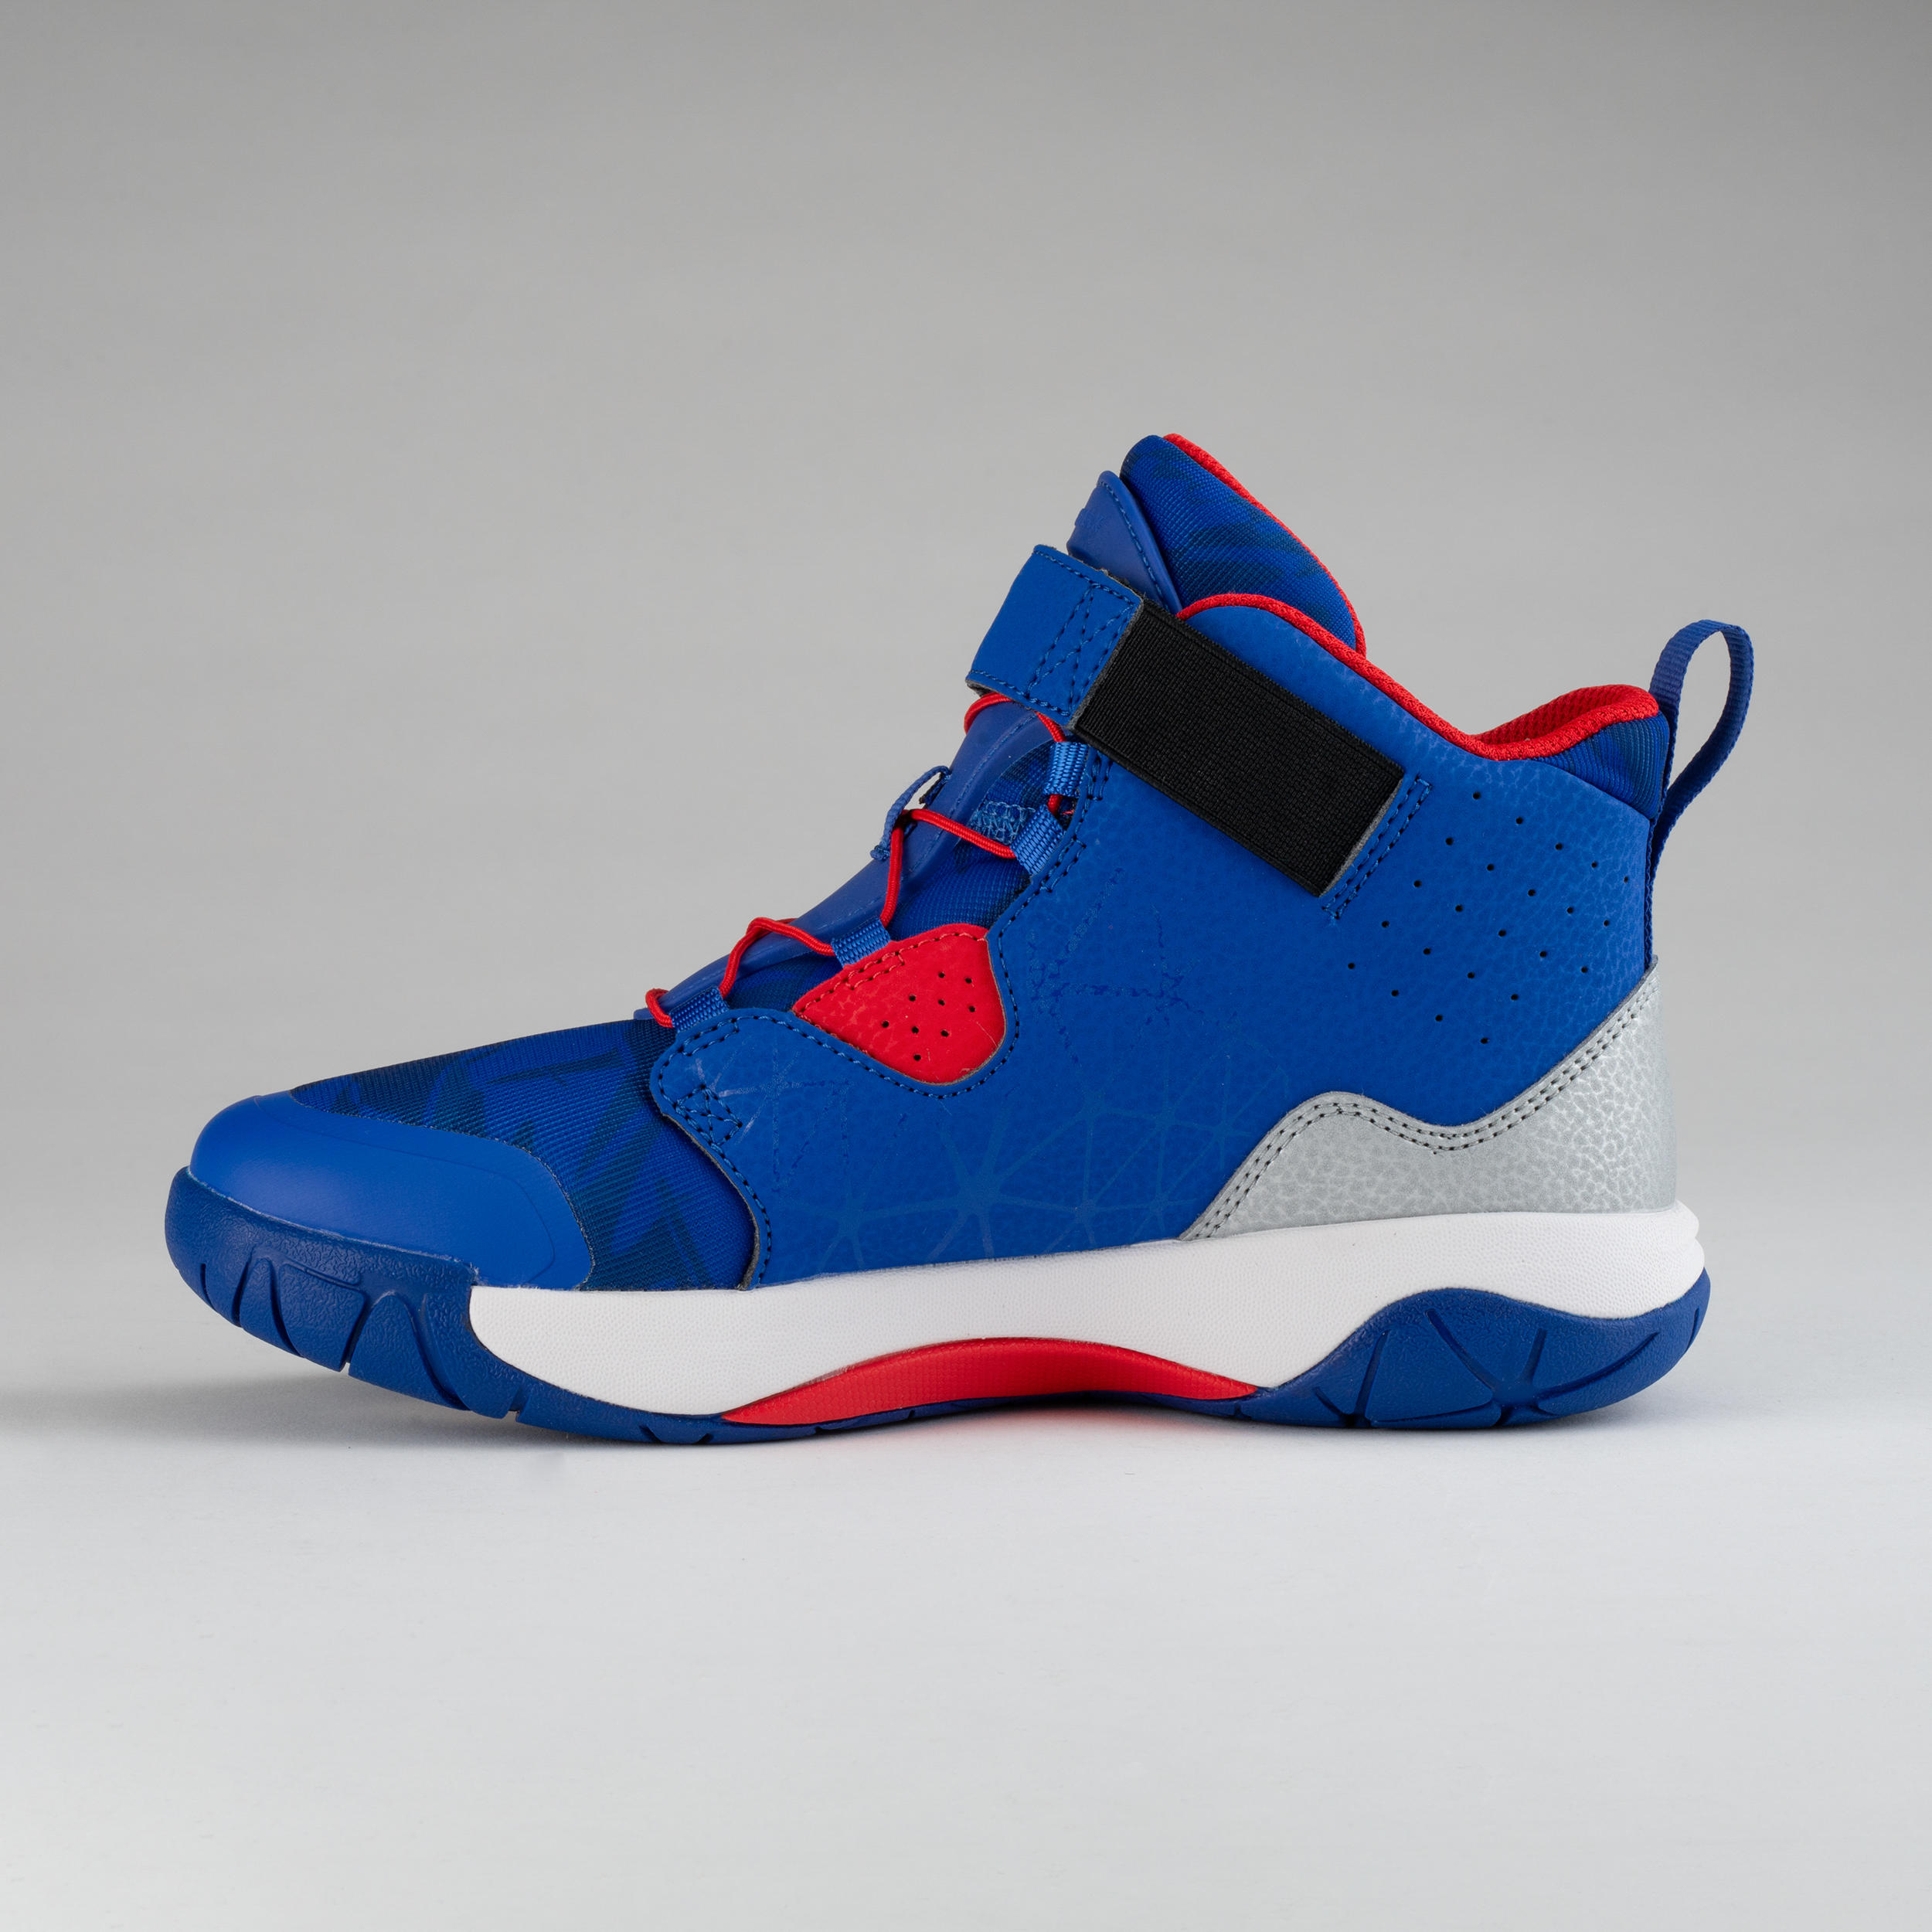 Boys'/Girls' Intermediate Basketball Shoes - Blue/Red Spider Lace 2/9